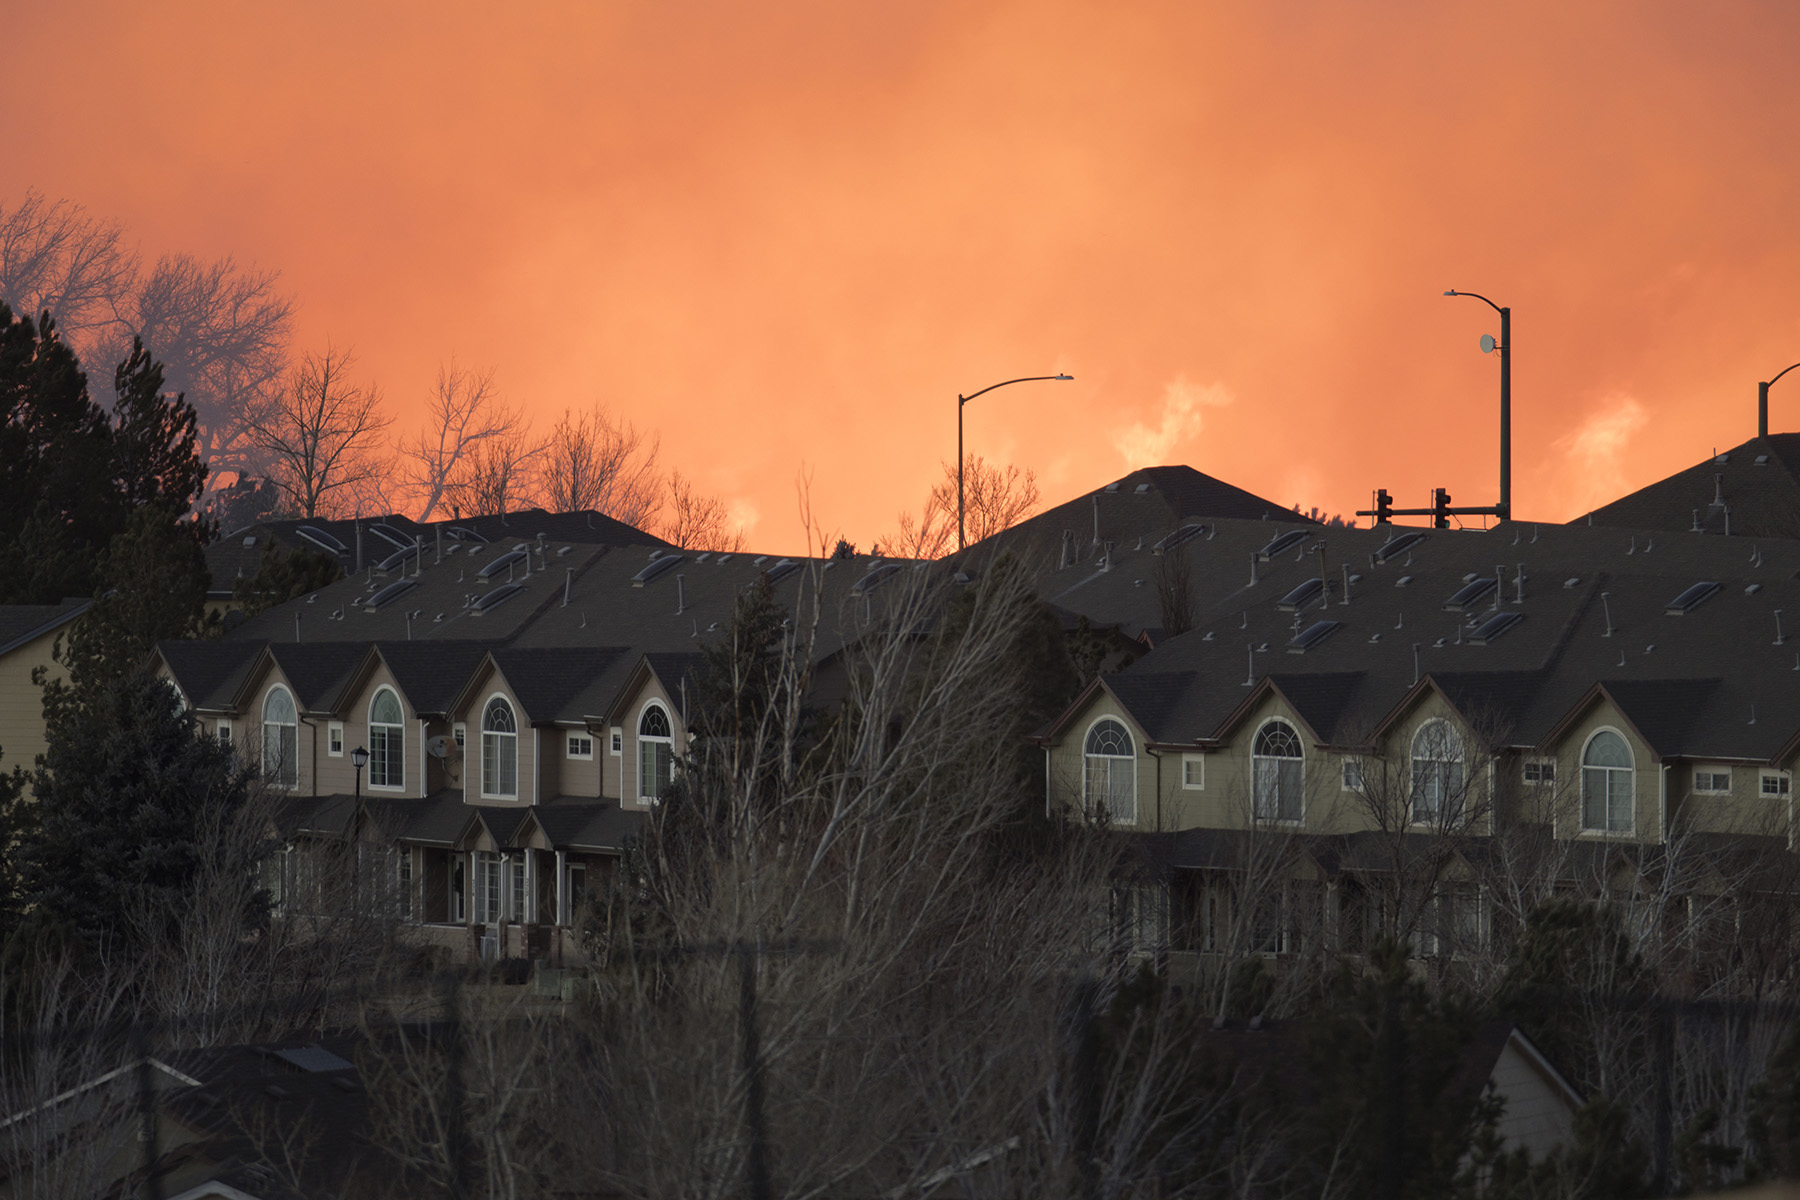 In the foreground are intact homes. In the background, the sky is hazy because of wildfire in the distance. 